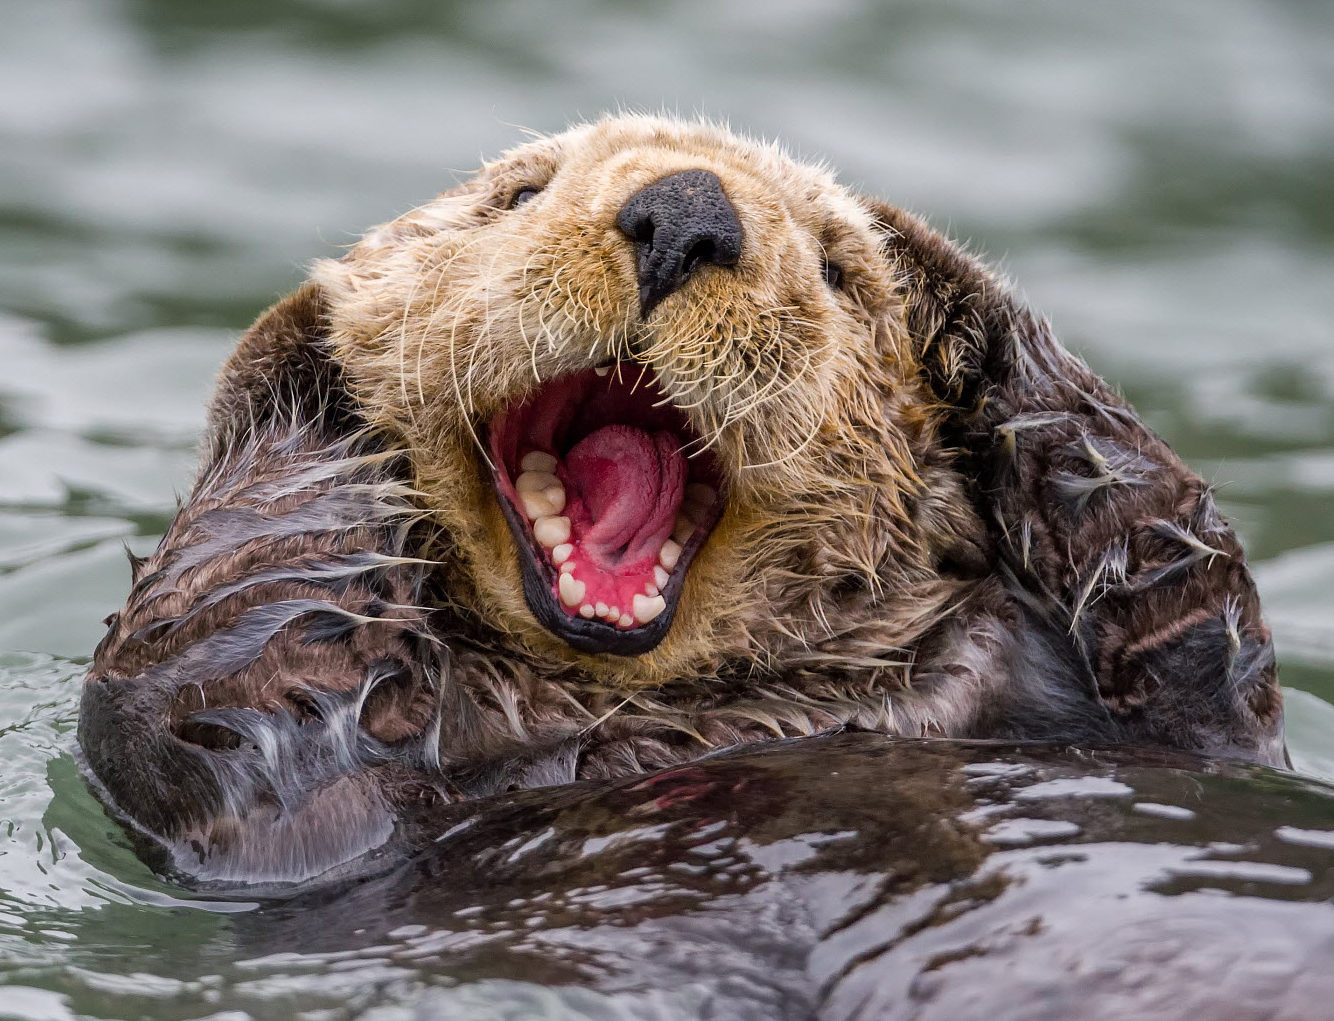 What's So Special About Sea Otters? - Ocean Conservancy